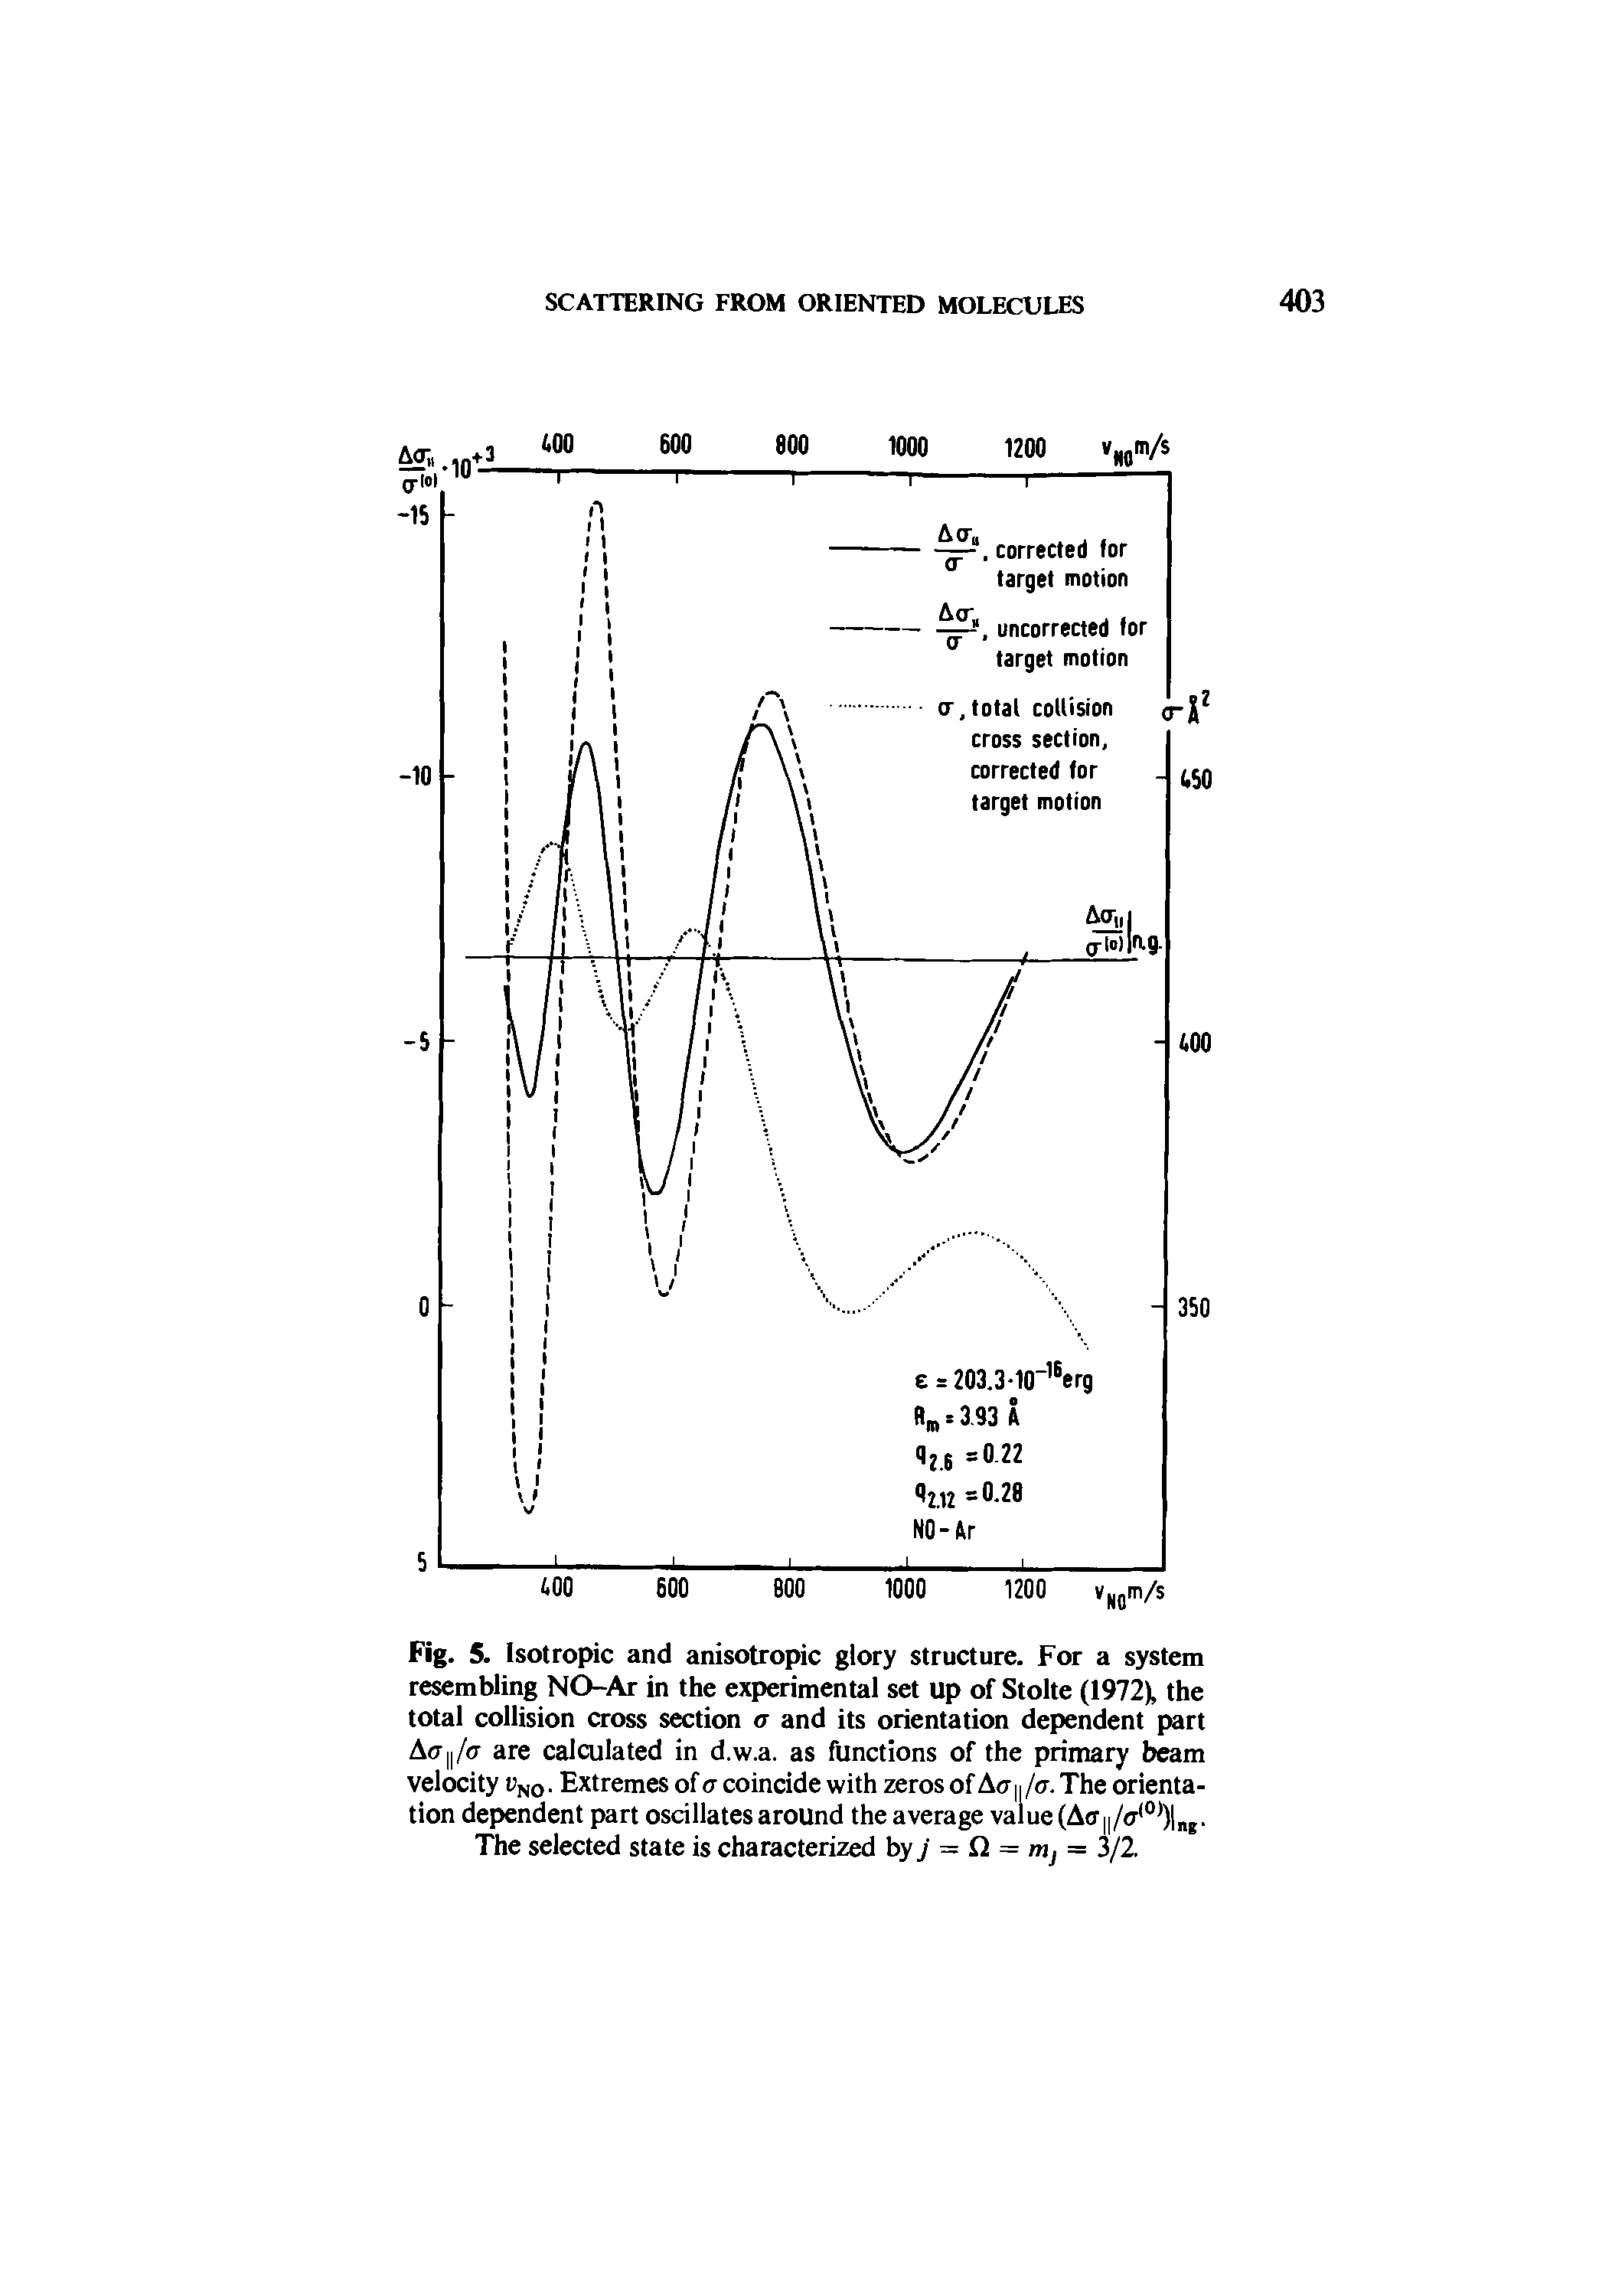 Fig. 5. Isotropic and anisotropic glory structure. For a system resembling NO-Ar in the experimental set up of Stolte (1972), the total collision cross section a and its orientation dependent part Act /cr are calculated in d.w.a. as functions of the primary beam velocity vN0. Extremes of a coincide with zeros of Acrn/cr. The orientation dependent part oscillates around the average value (Aff /<7,0,) nB.